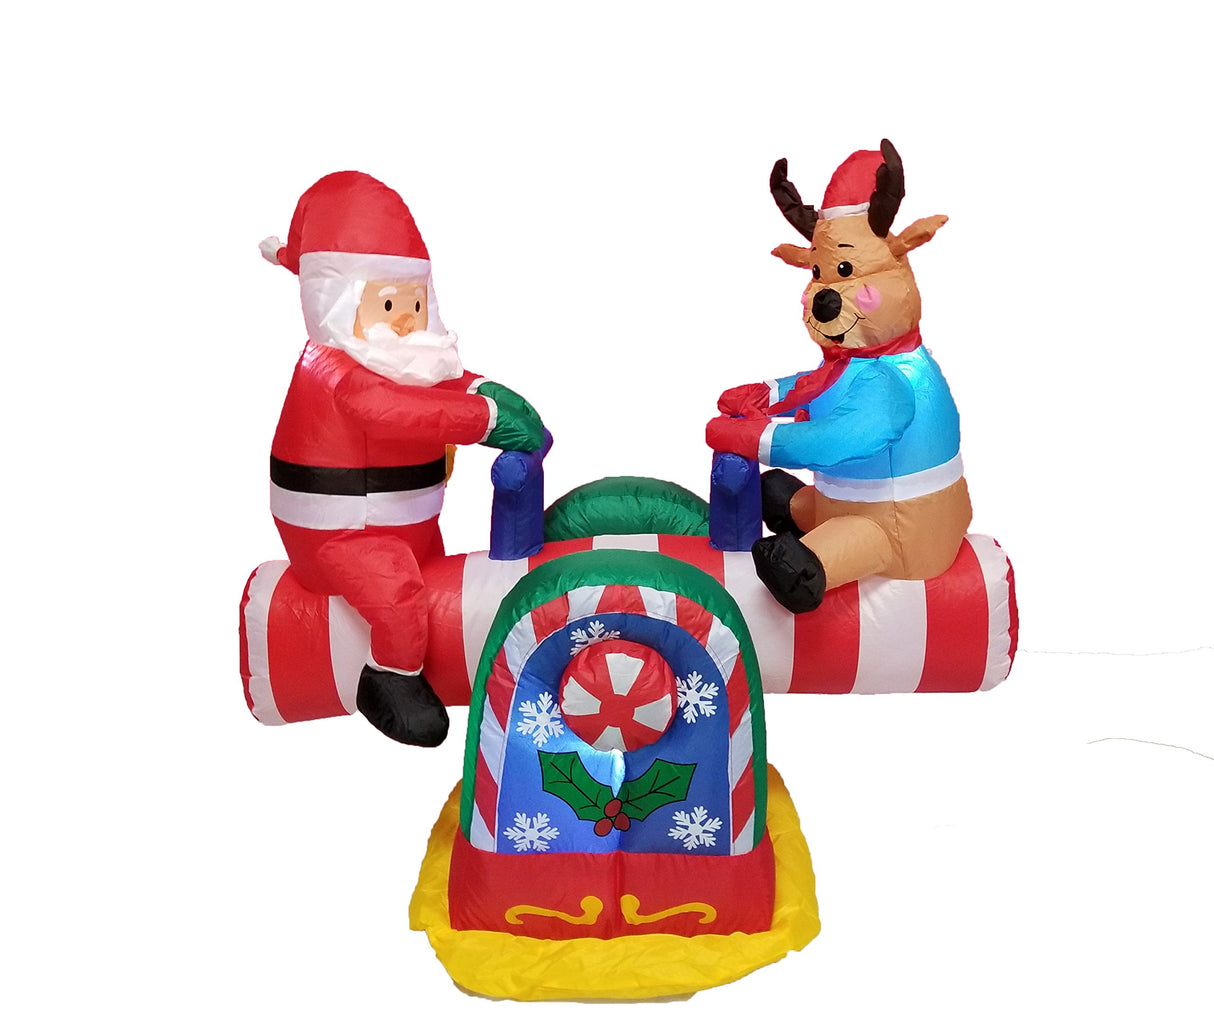 BZB Goods 4 Foot Animated Christmas Inflatable Santa Claus and Reindeer on Teeter Totter Outdoor Yard Decoration